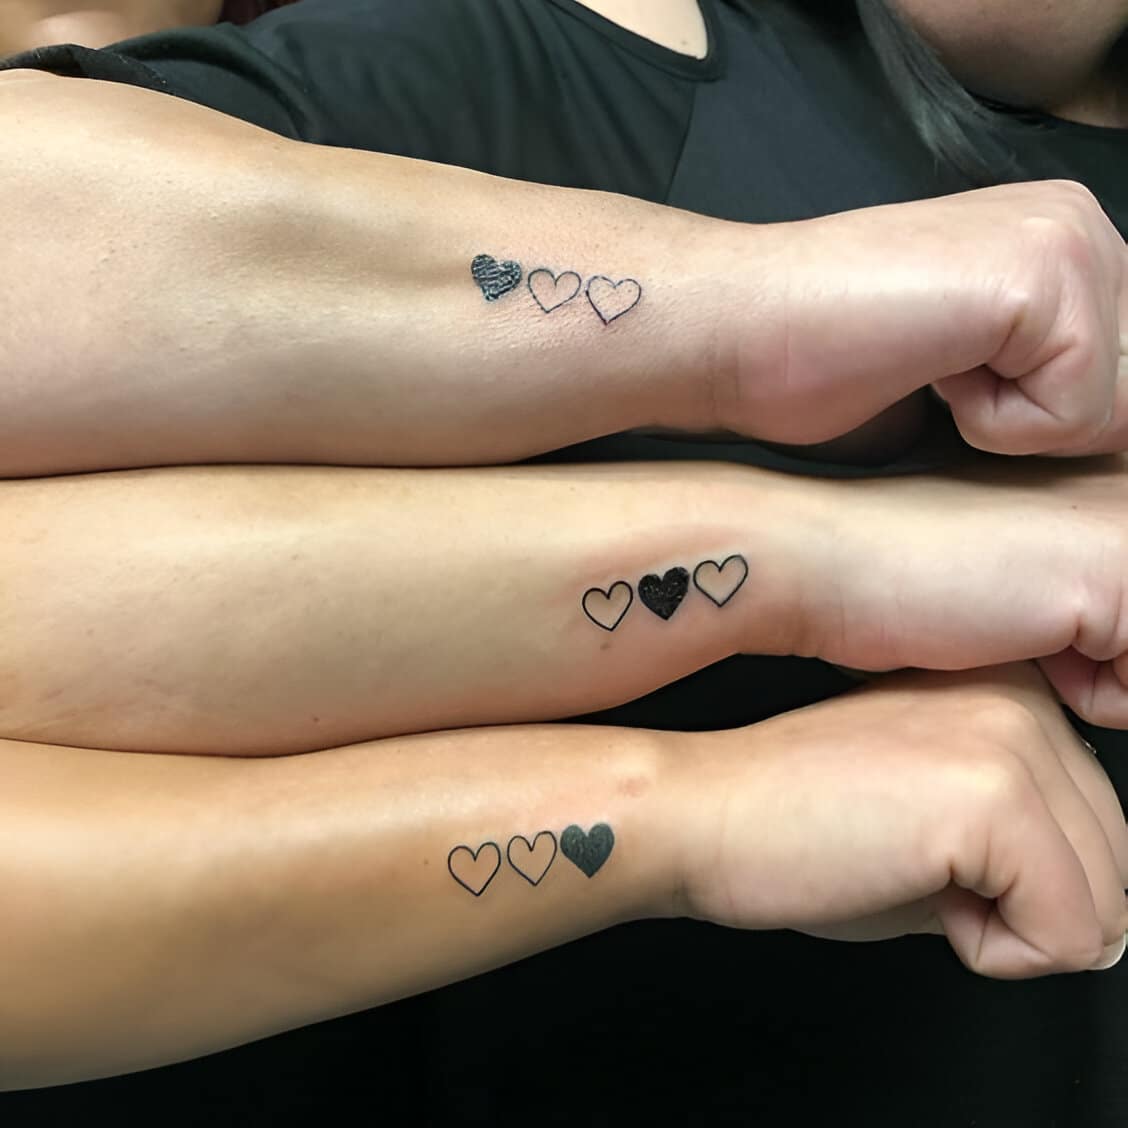 30 Elegant Matching Heart Tattoos To Get With Your Partner ASAP 29